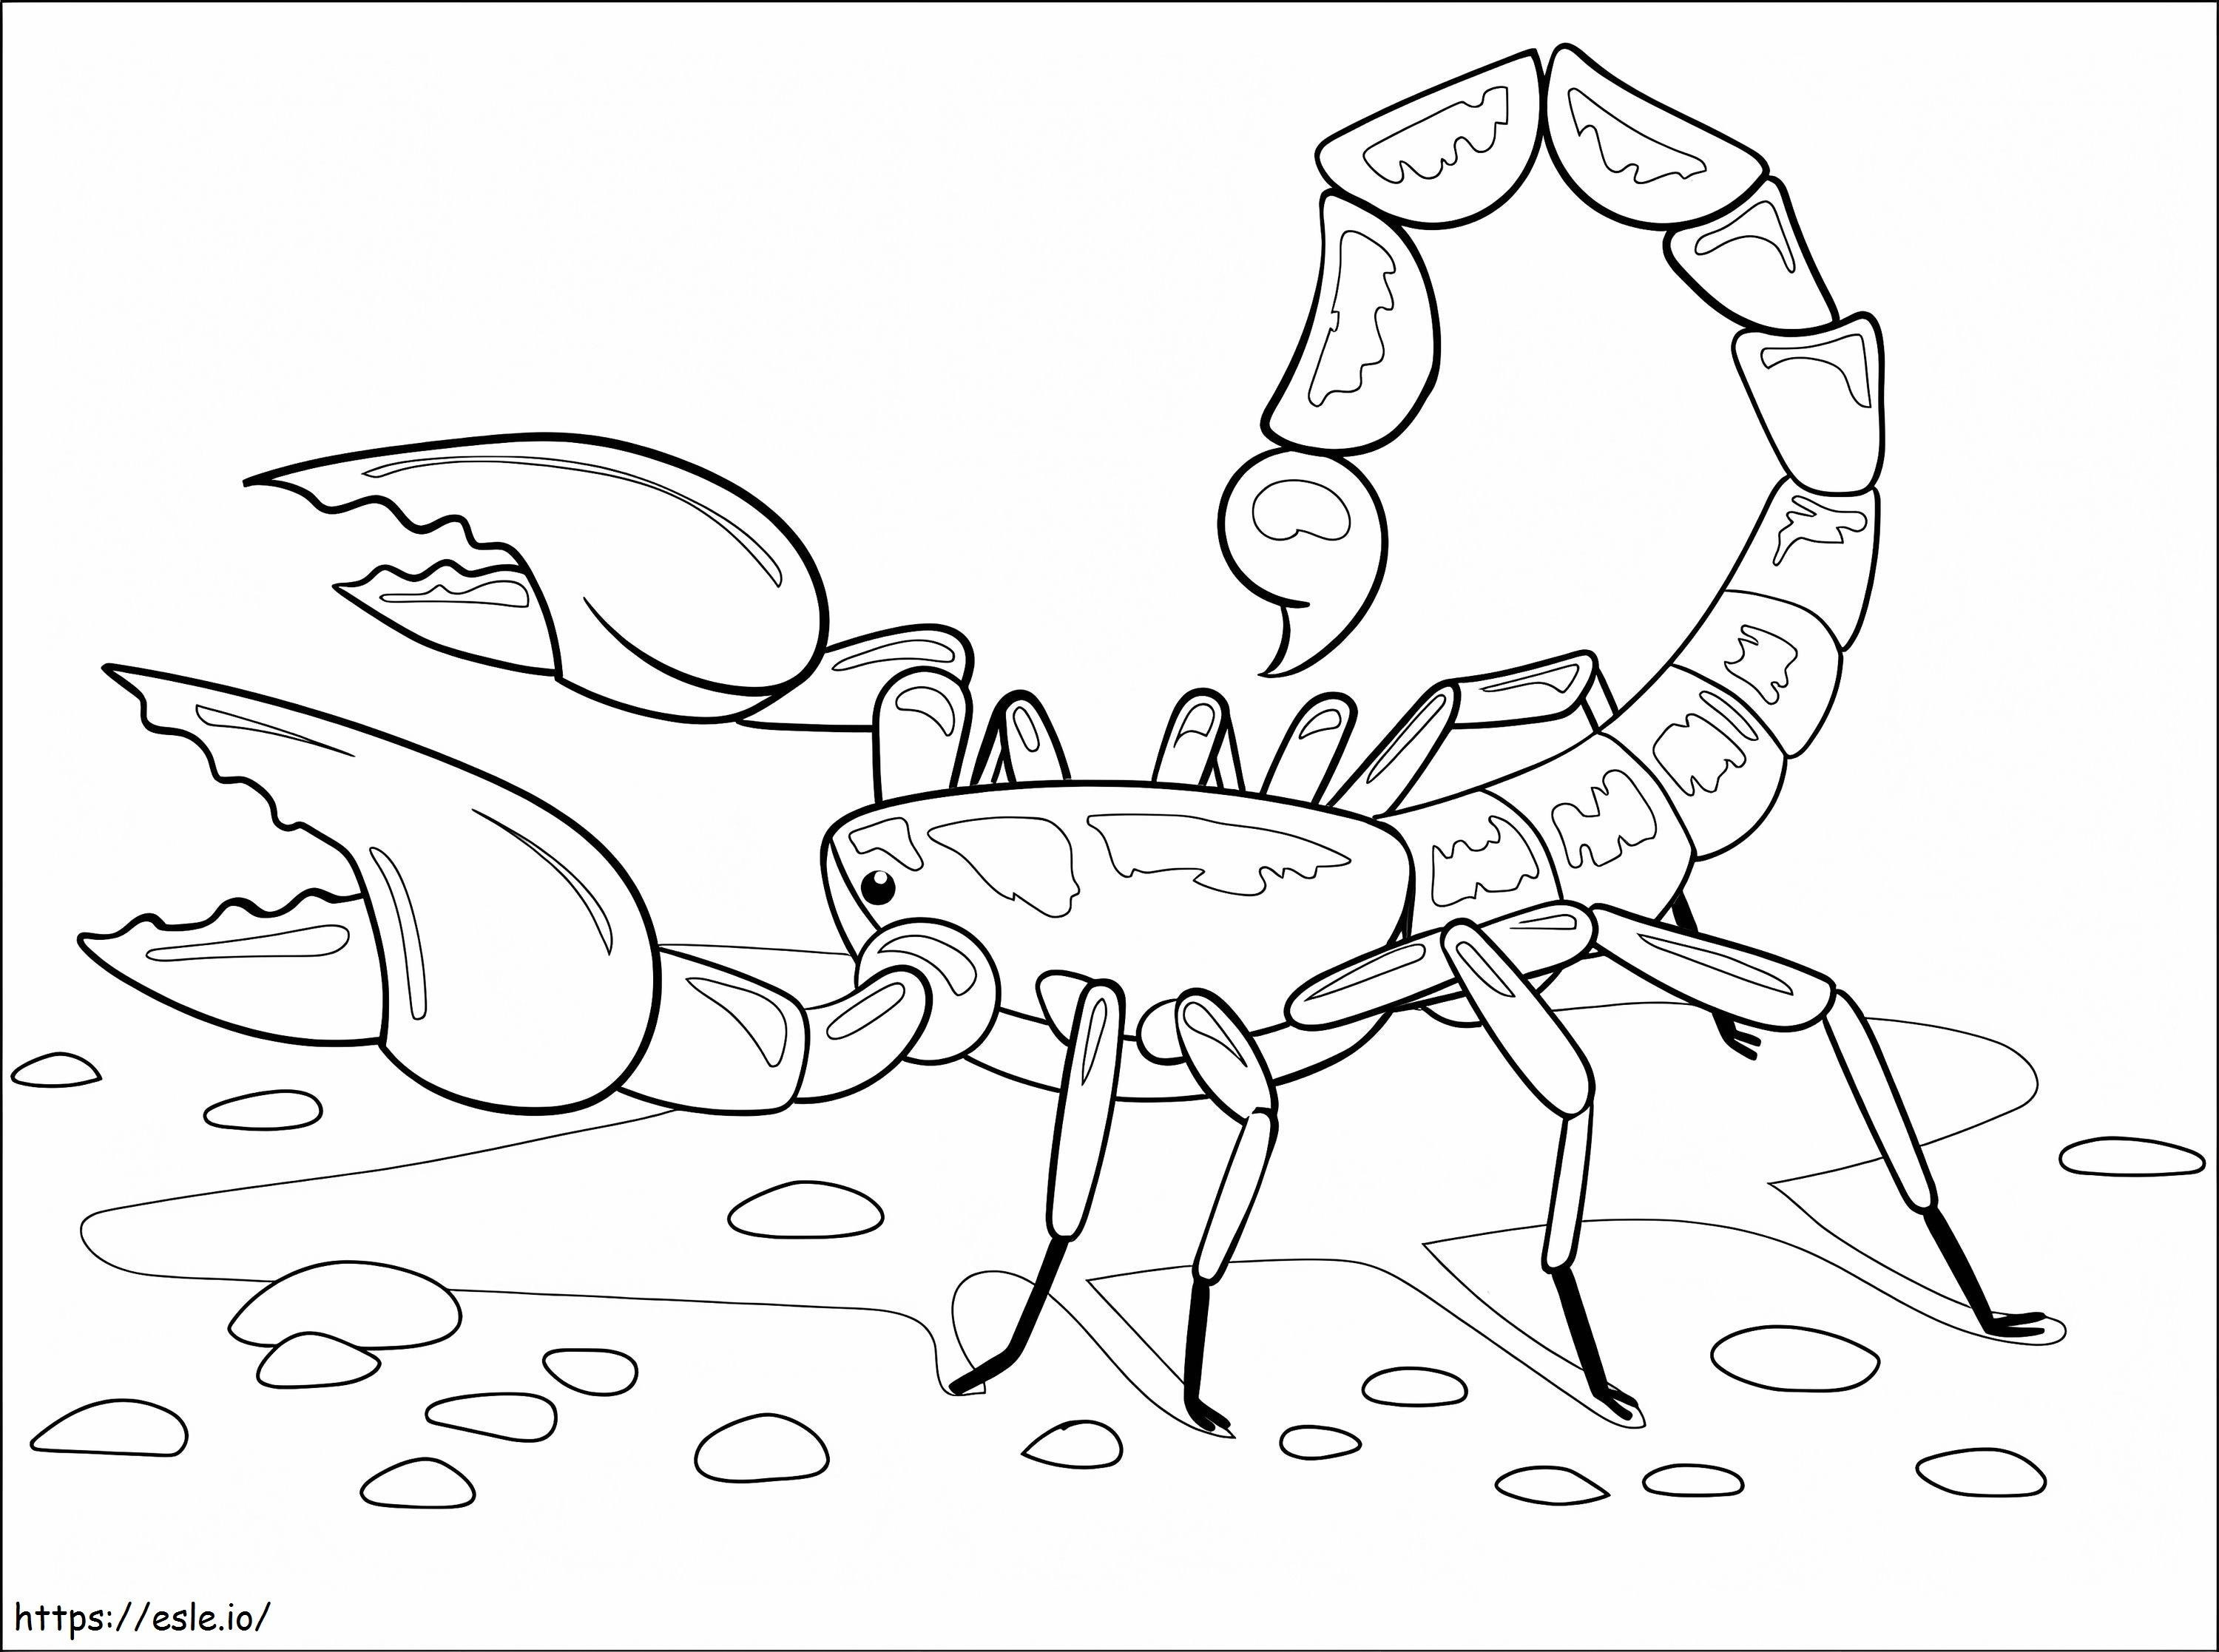 A Scorpion coloring page